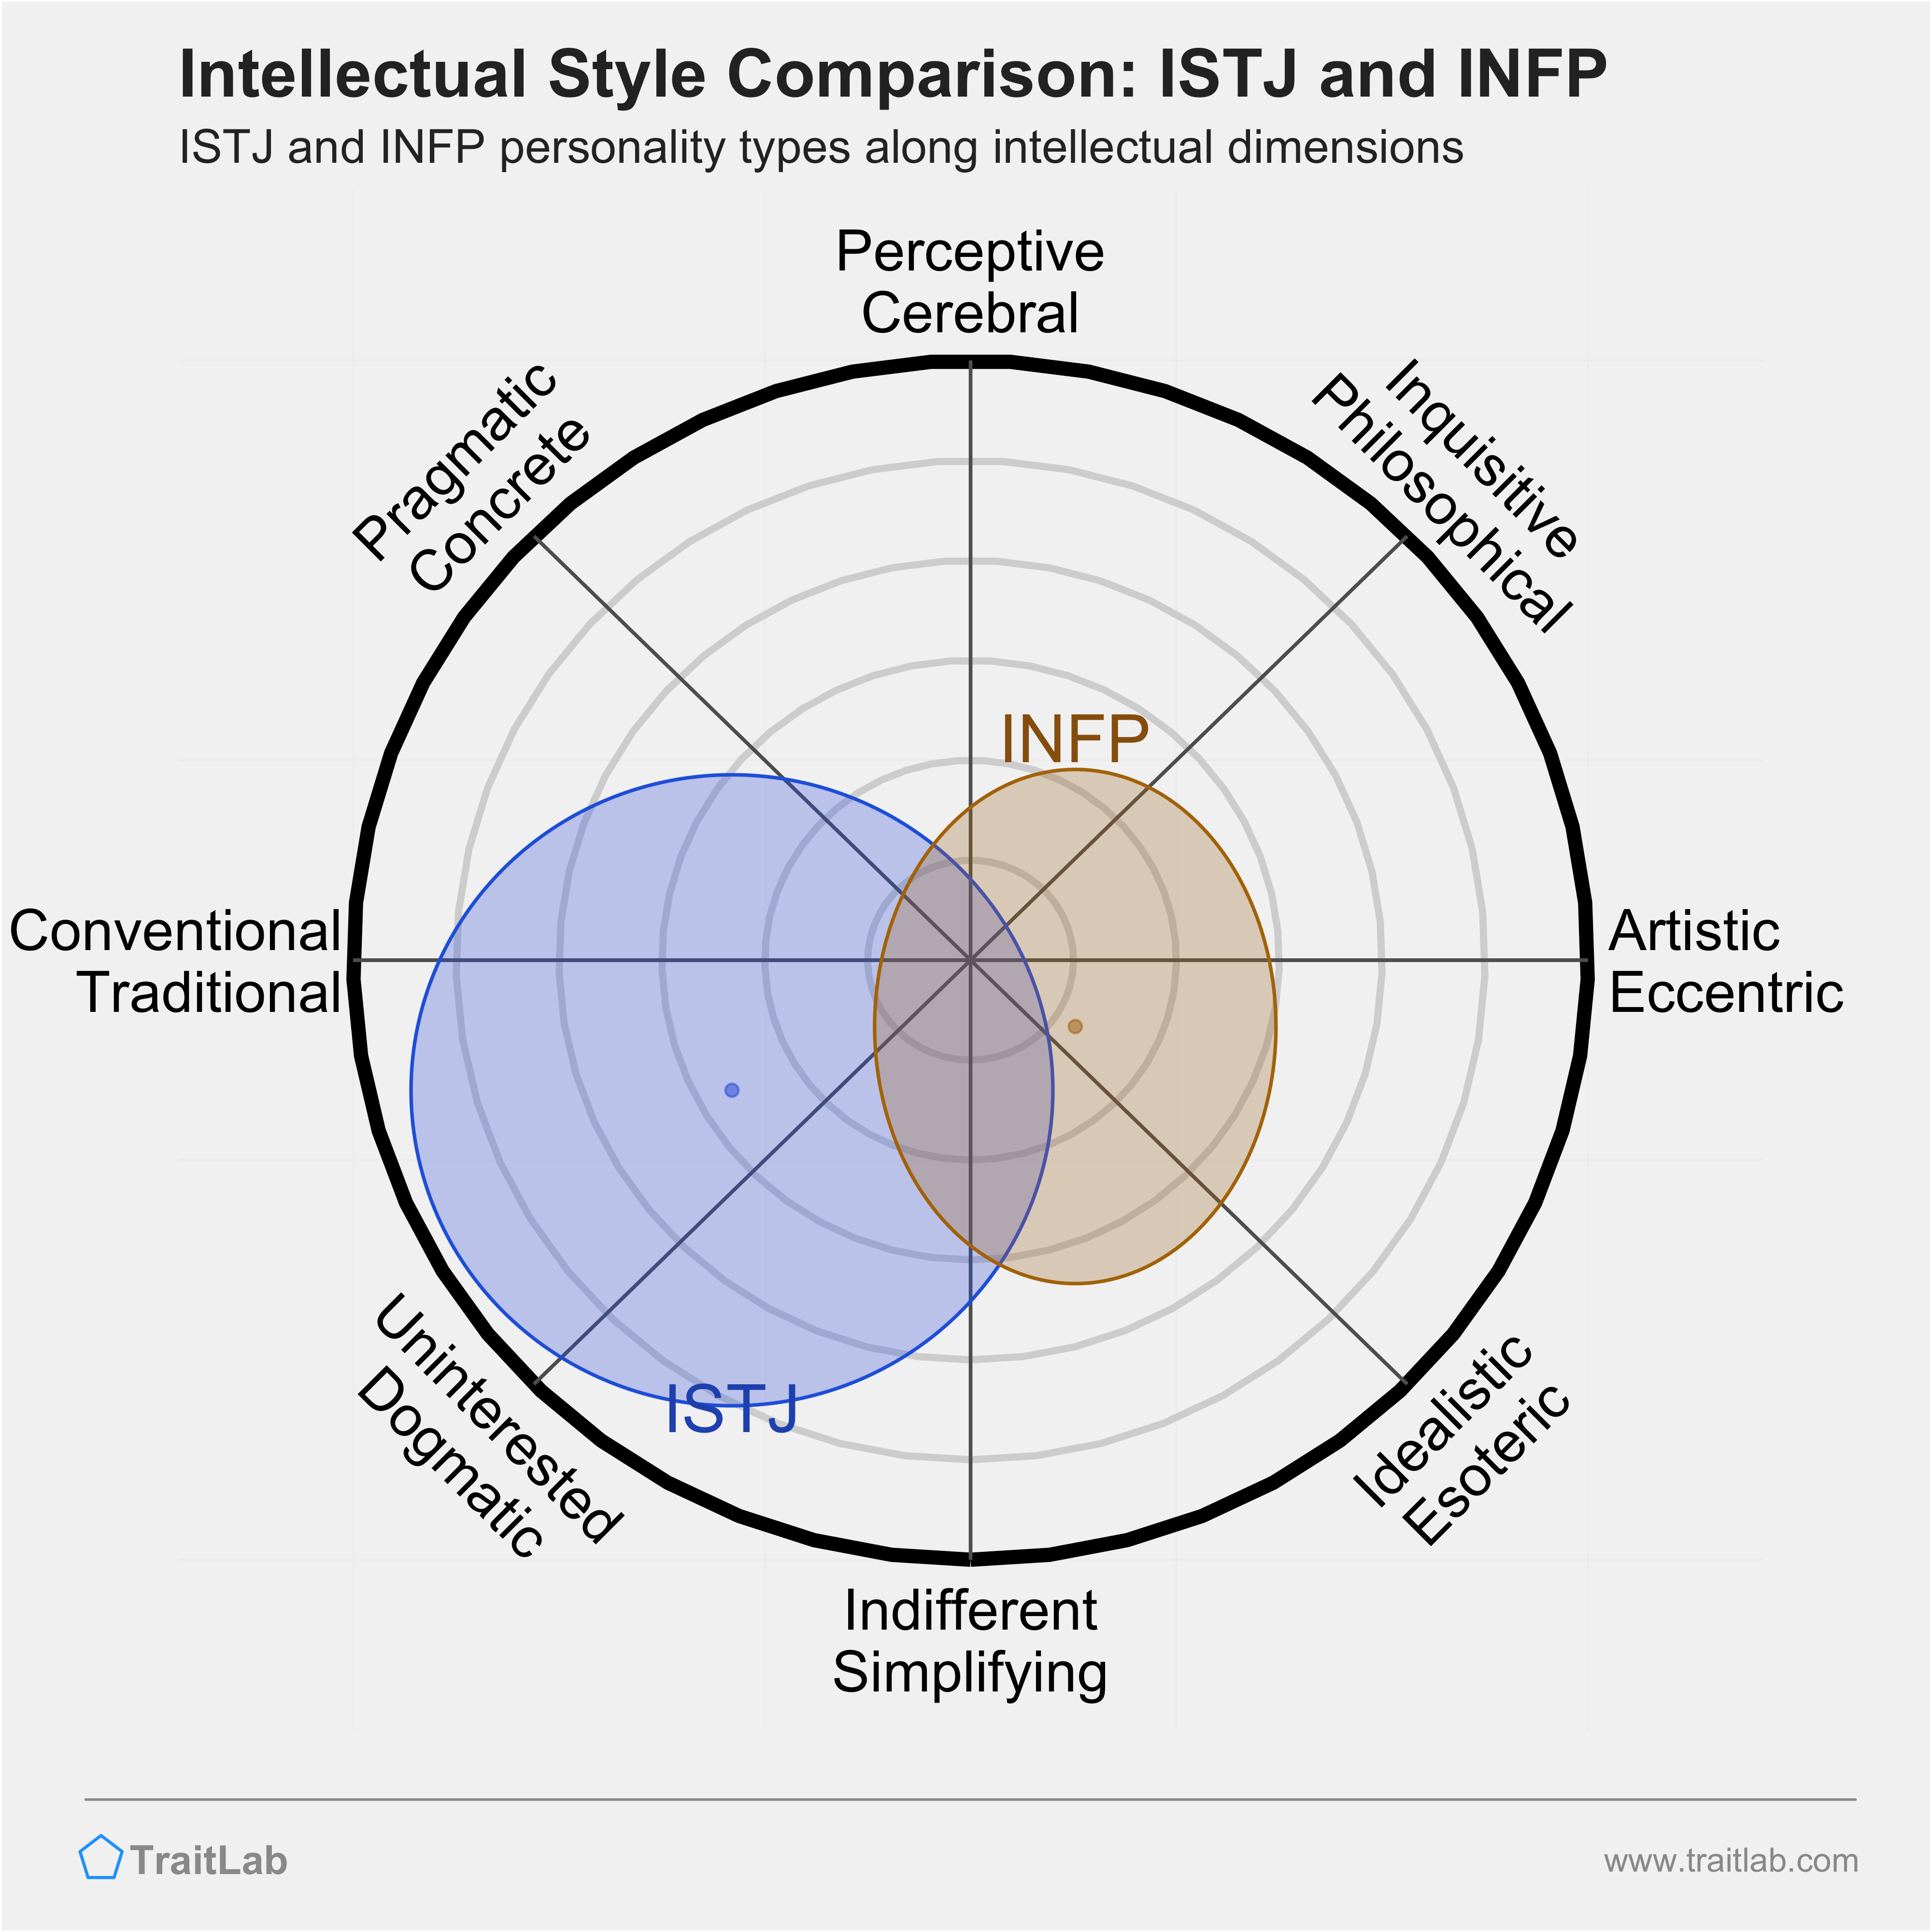 ISTJ and INFP comparison across intellectual dimensions